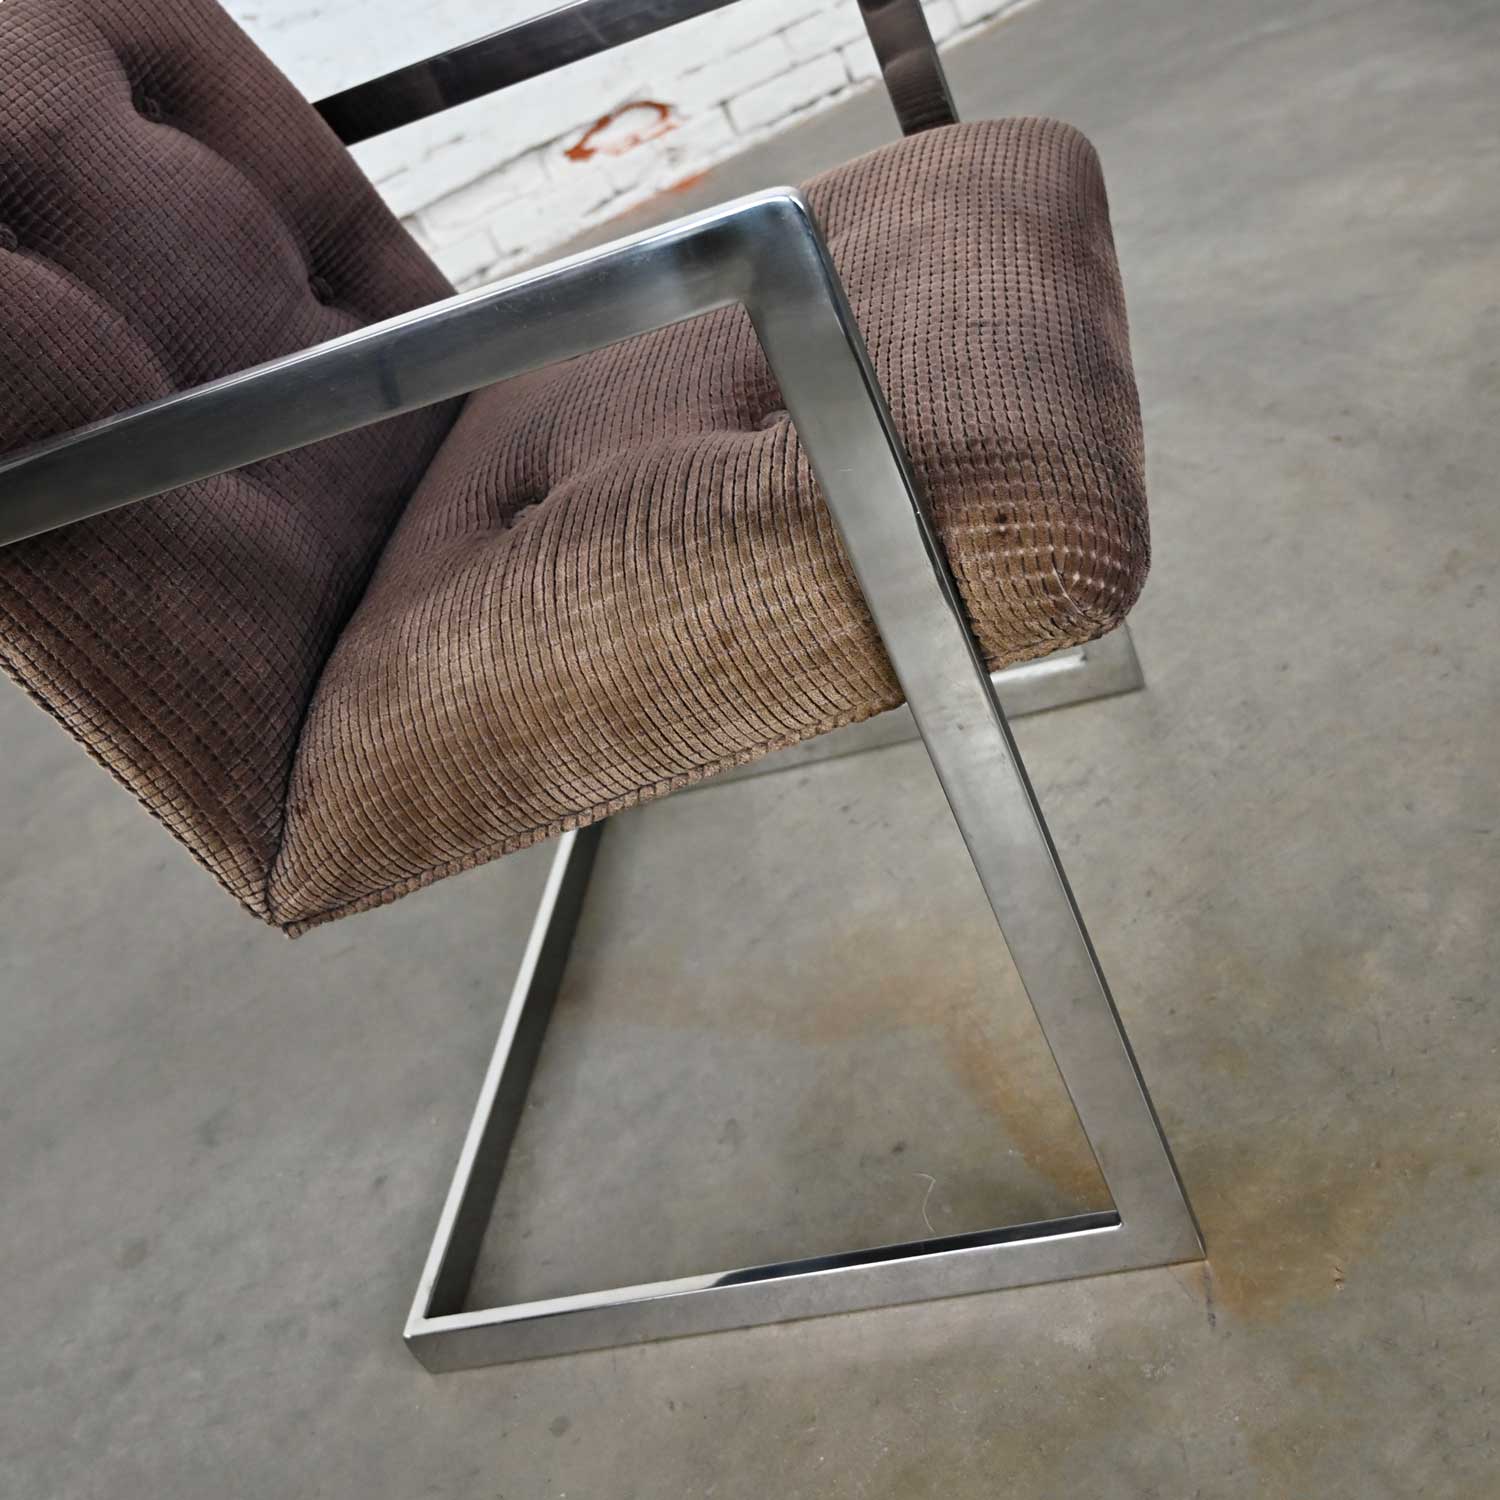 Vintage Modern Chrome & Brown Chenille Cantilever Chair in Style of Brno by Knoll